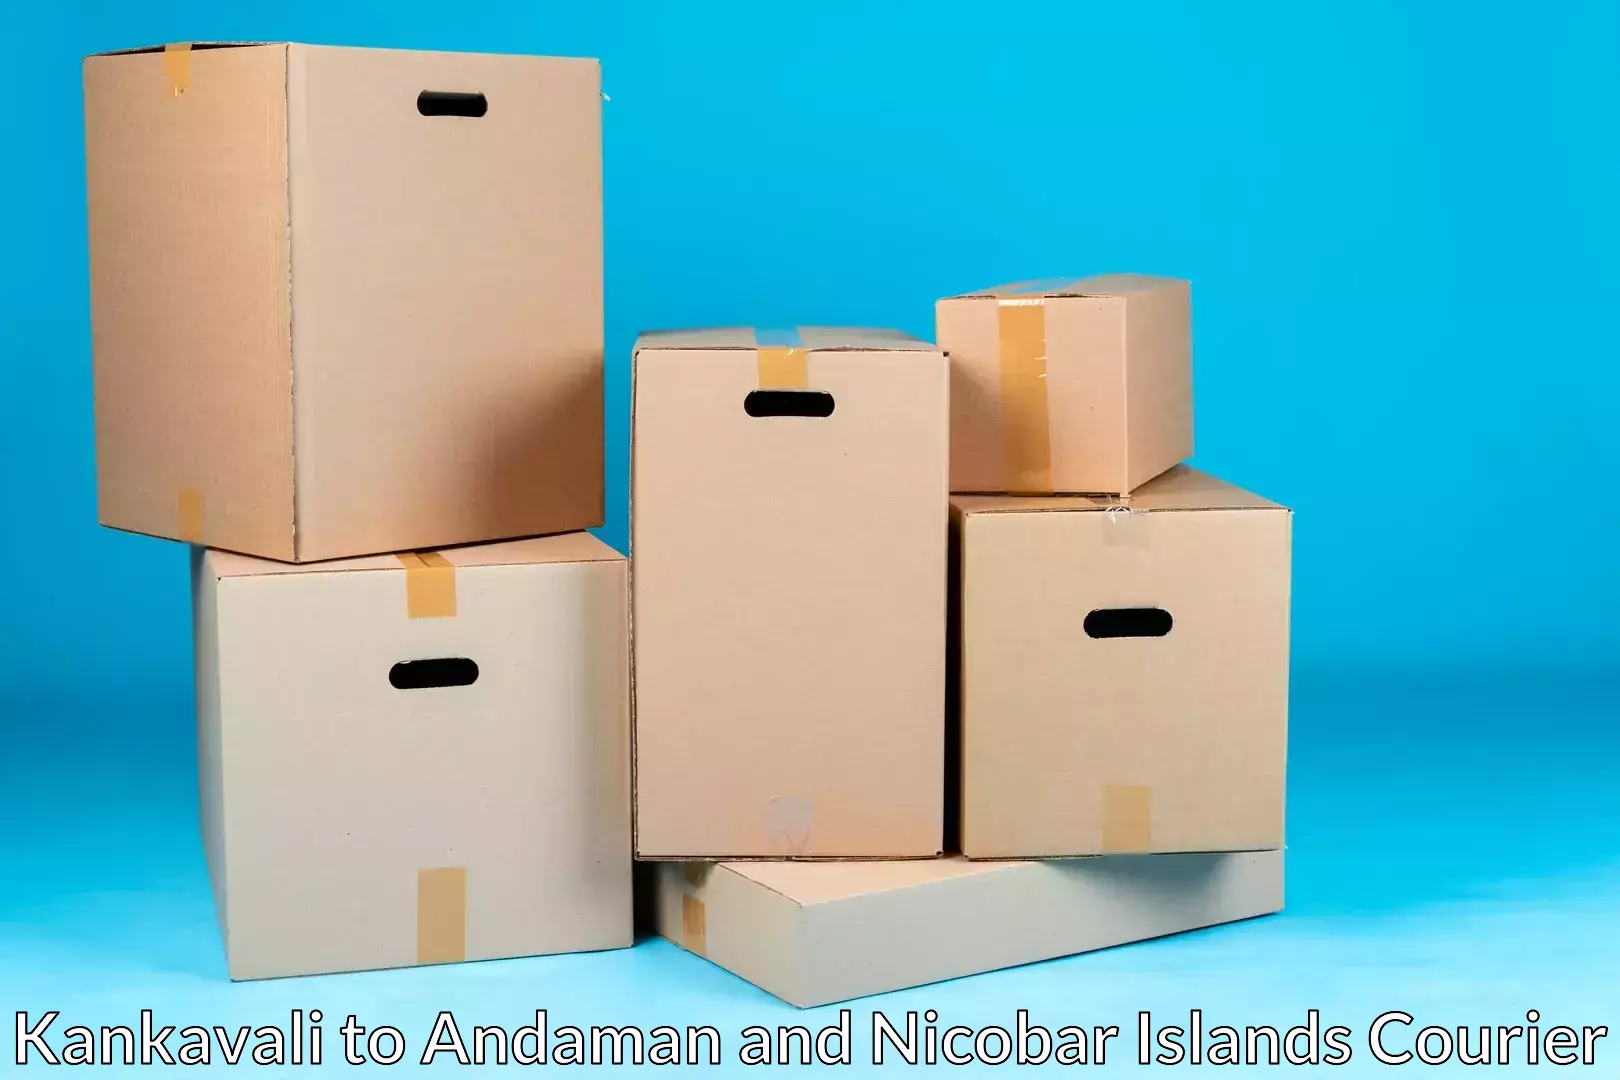 Quality moving and storage Kankavali to Andaman and Nicobar Islands